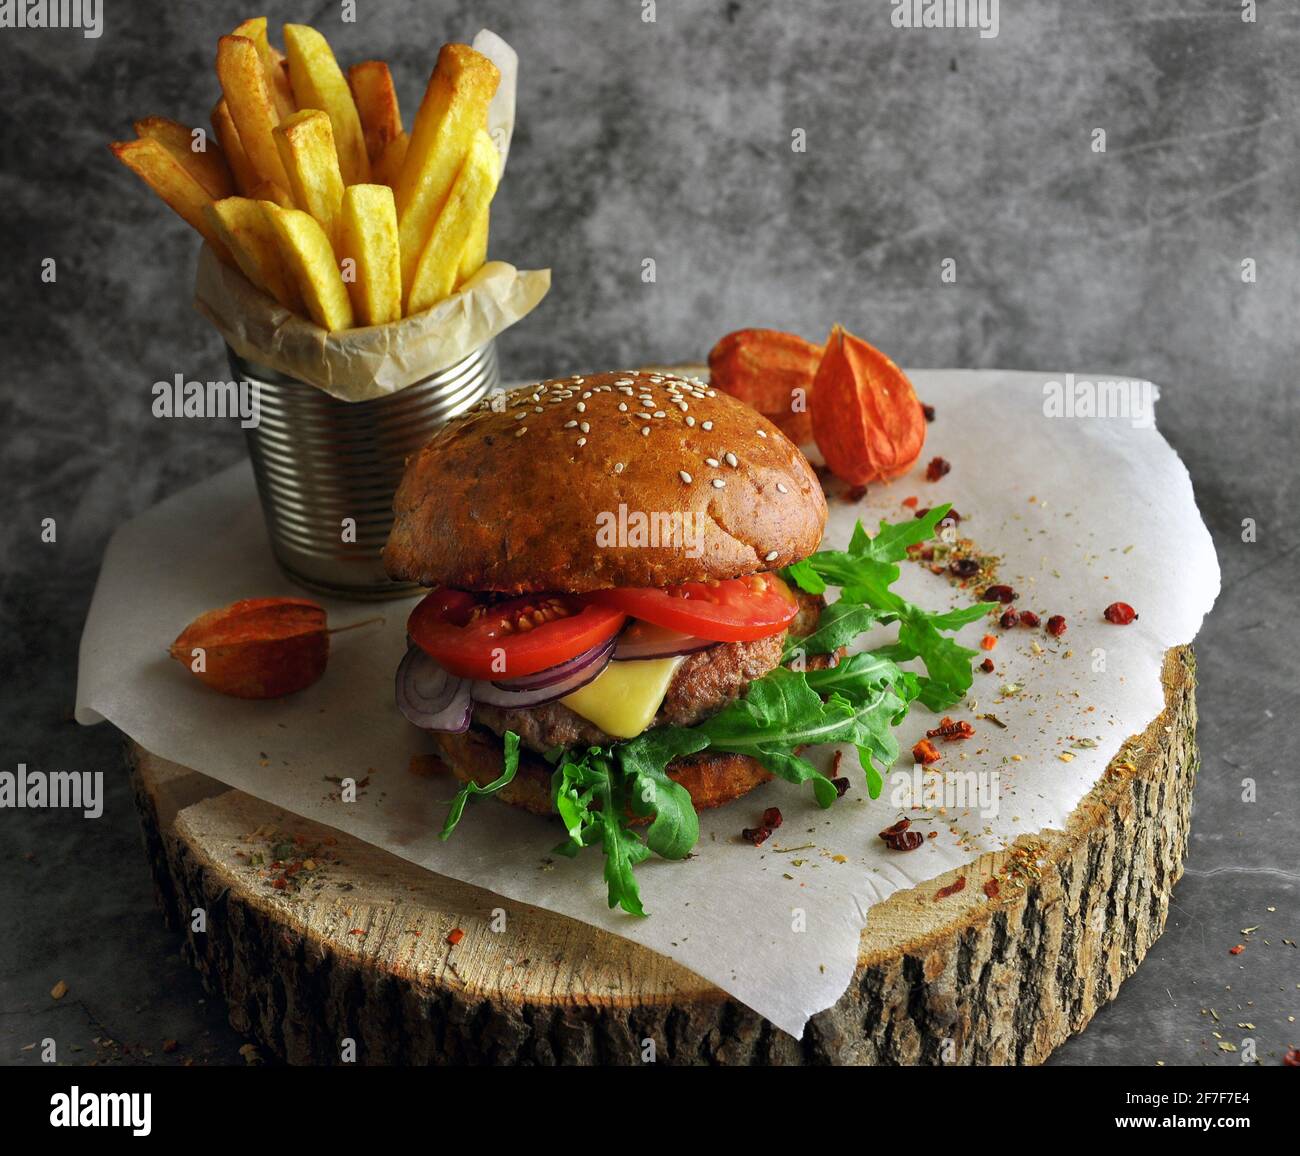 Burger on a wooden board. Restaurant serving concept. Stock Photo